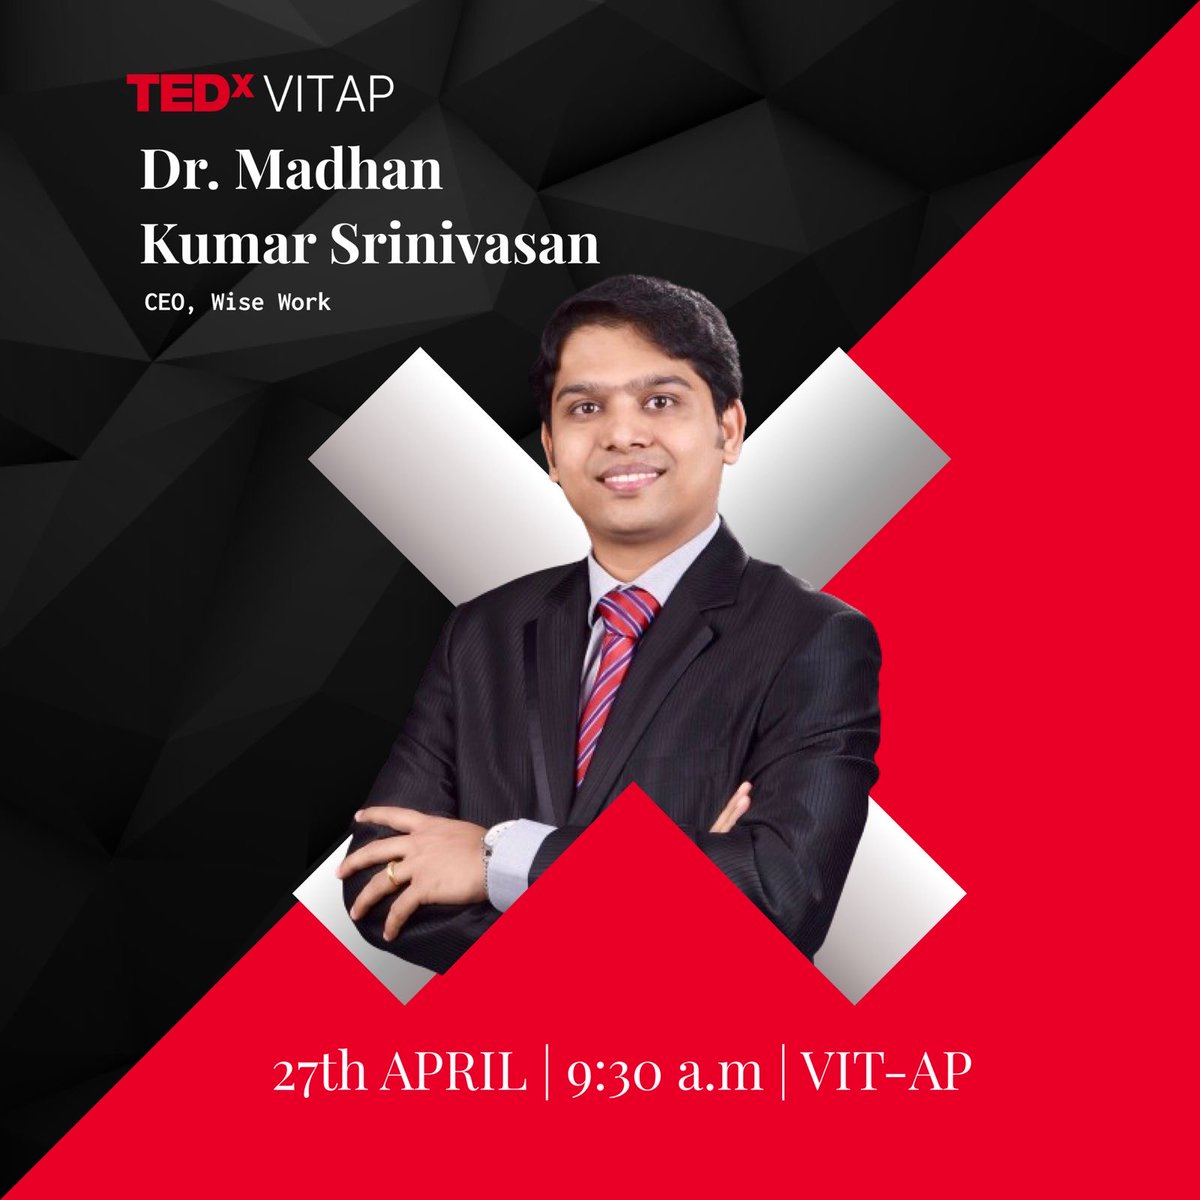 🔥TEDxVITAP is back with a bang, bringing together some of the brightest minds to share their ideas and stories. Book your tickets now! 📷 tedxvitap.com Let's learn, grow, and be inspired together. See you there! 📷#TEDxVITAP #VITAP